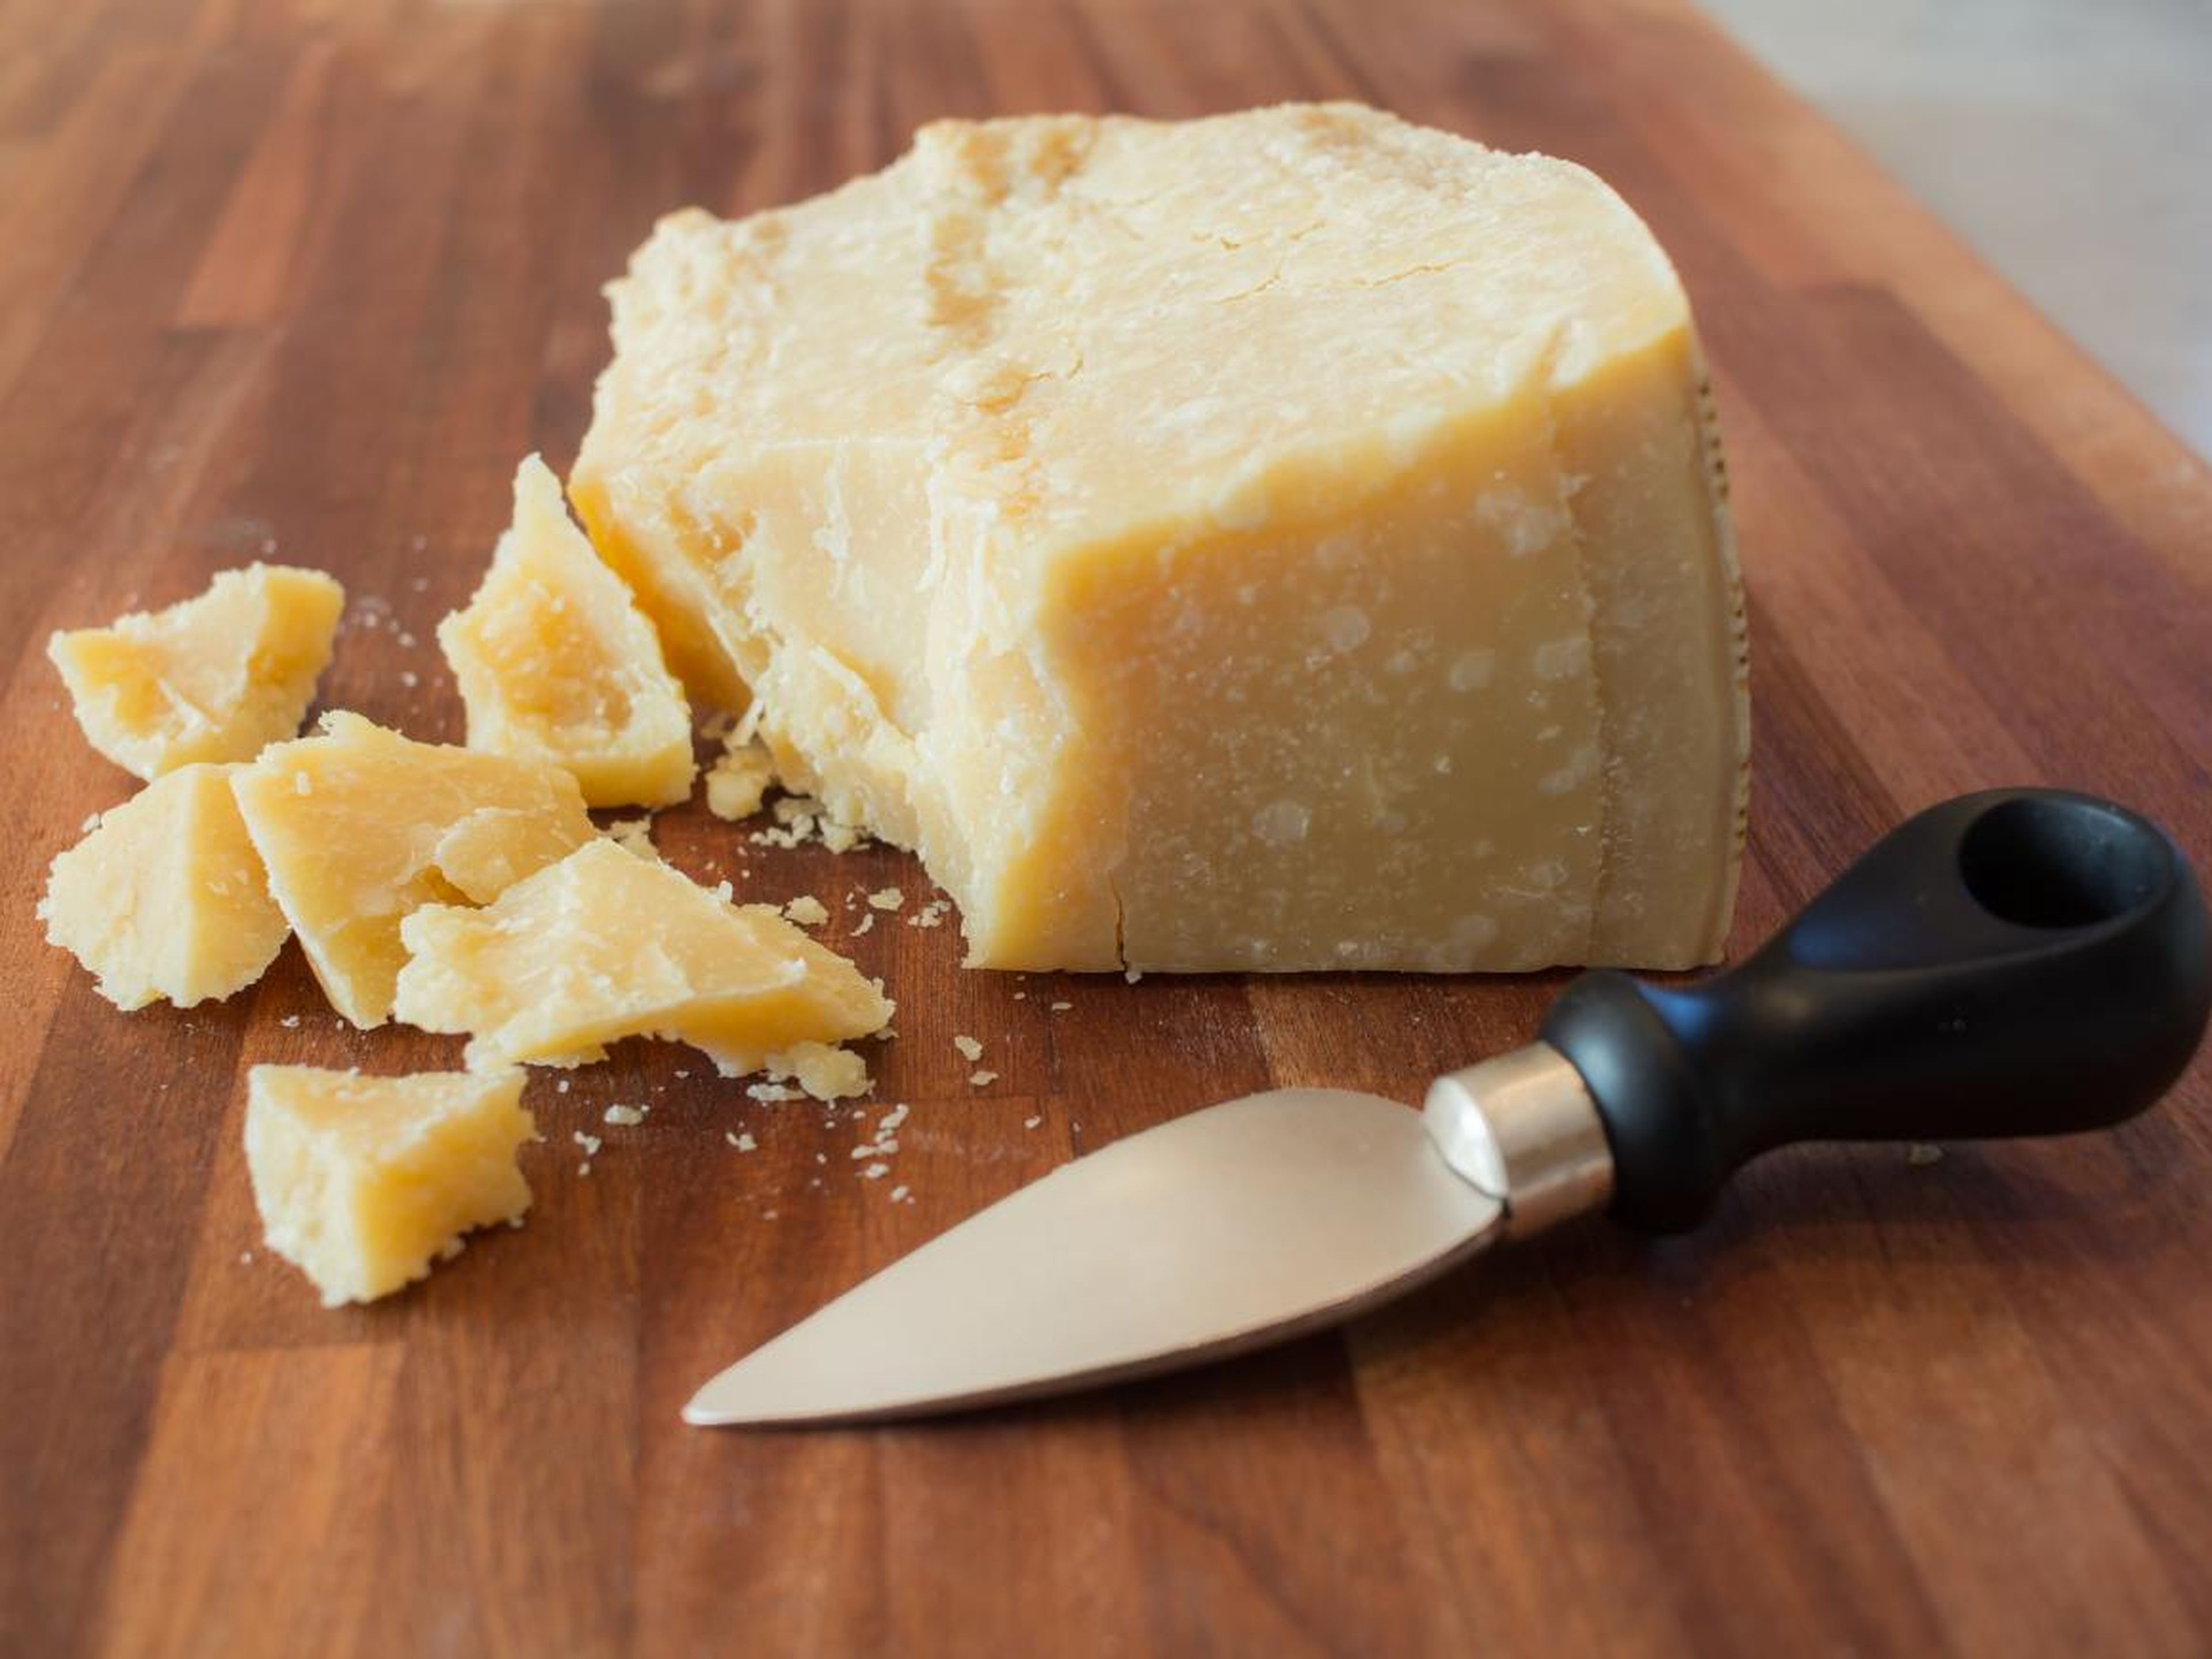 Your parmesan cheese probably isn't from Parma, Italy.